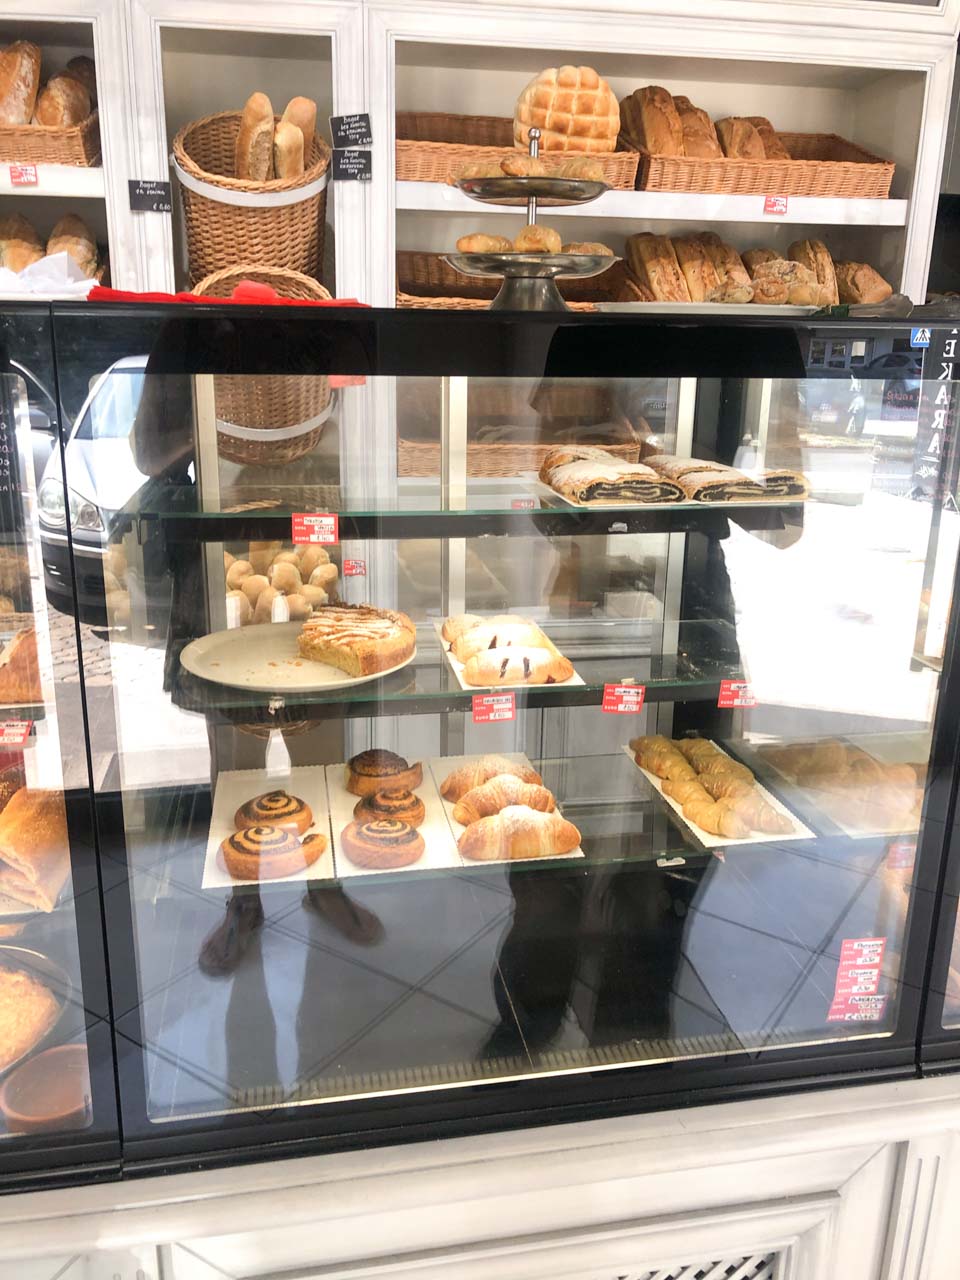 Pastries in a glass display case at Pekara Buongiorno in Kotor, Montenegro